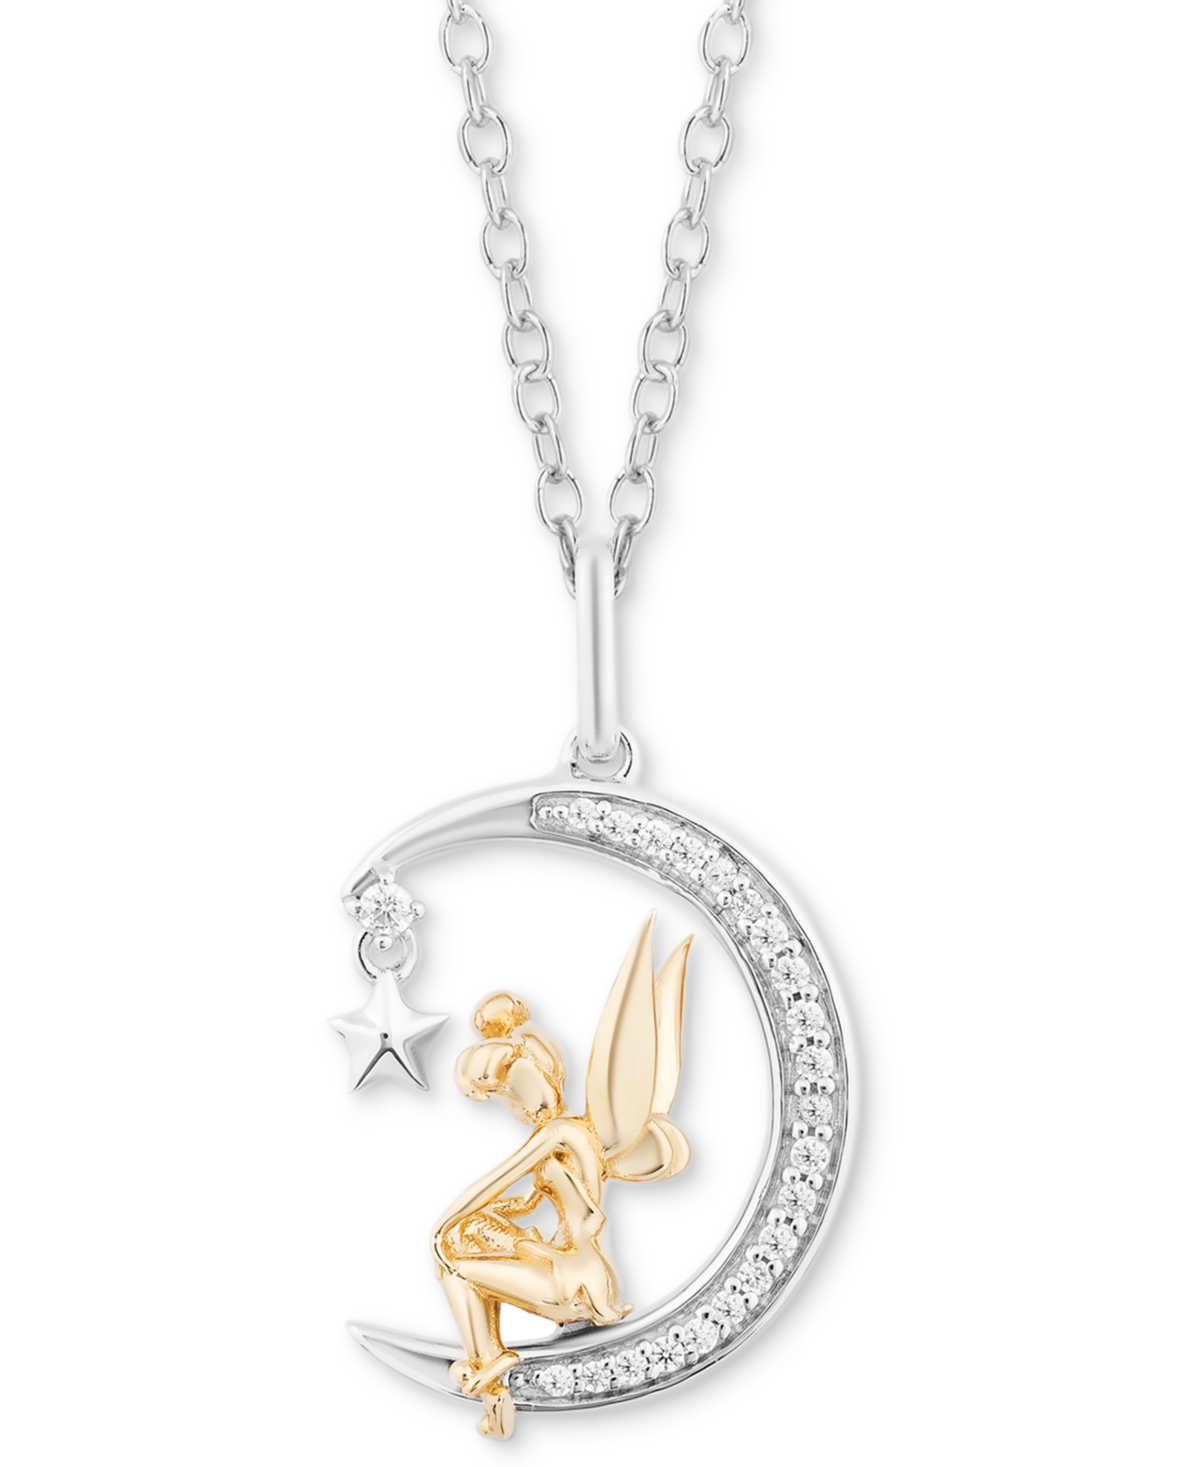 Enchanted Disney Fine Jewelry Diamond Tinker Bell Moon Pendant Necklace (1/10 ct. t.w.) in Sterling Silver & 14k Gold, 16" + 2" extender